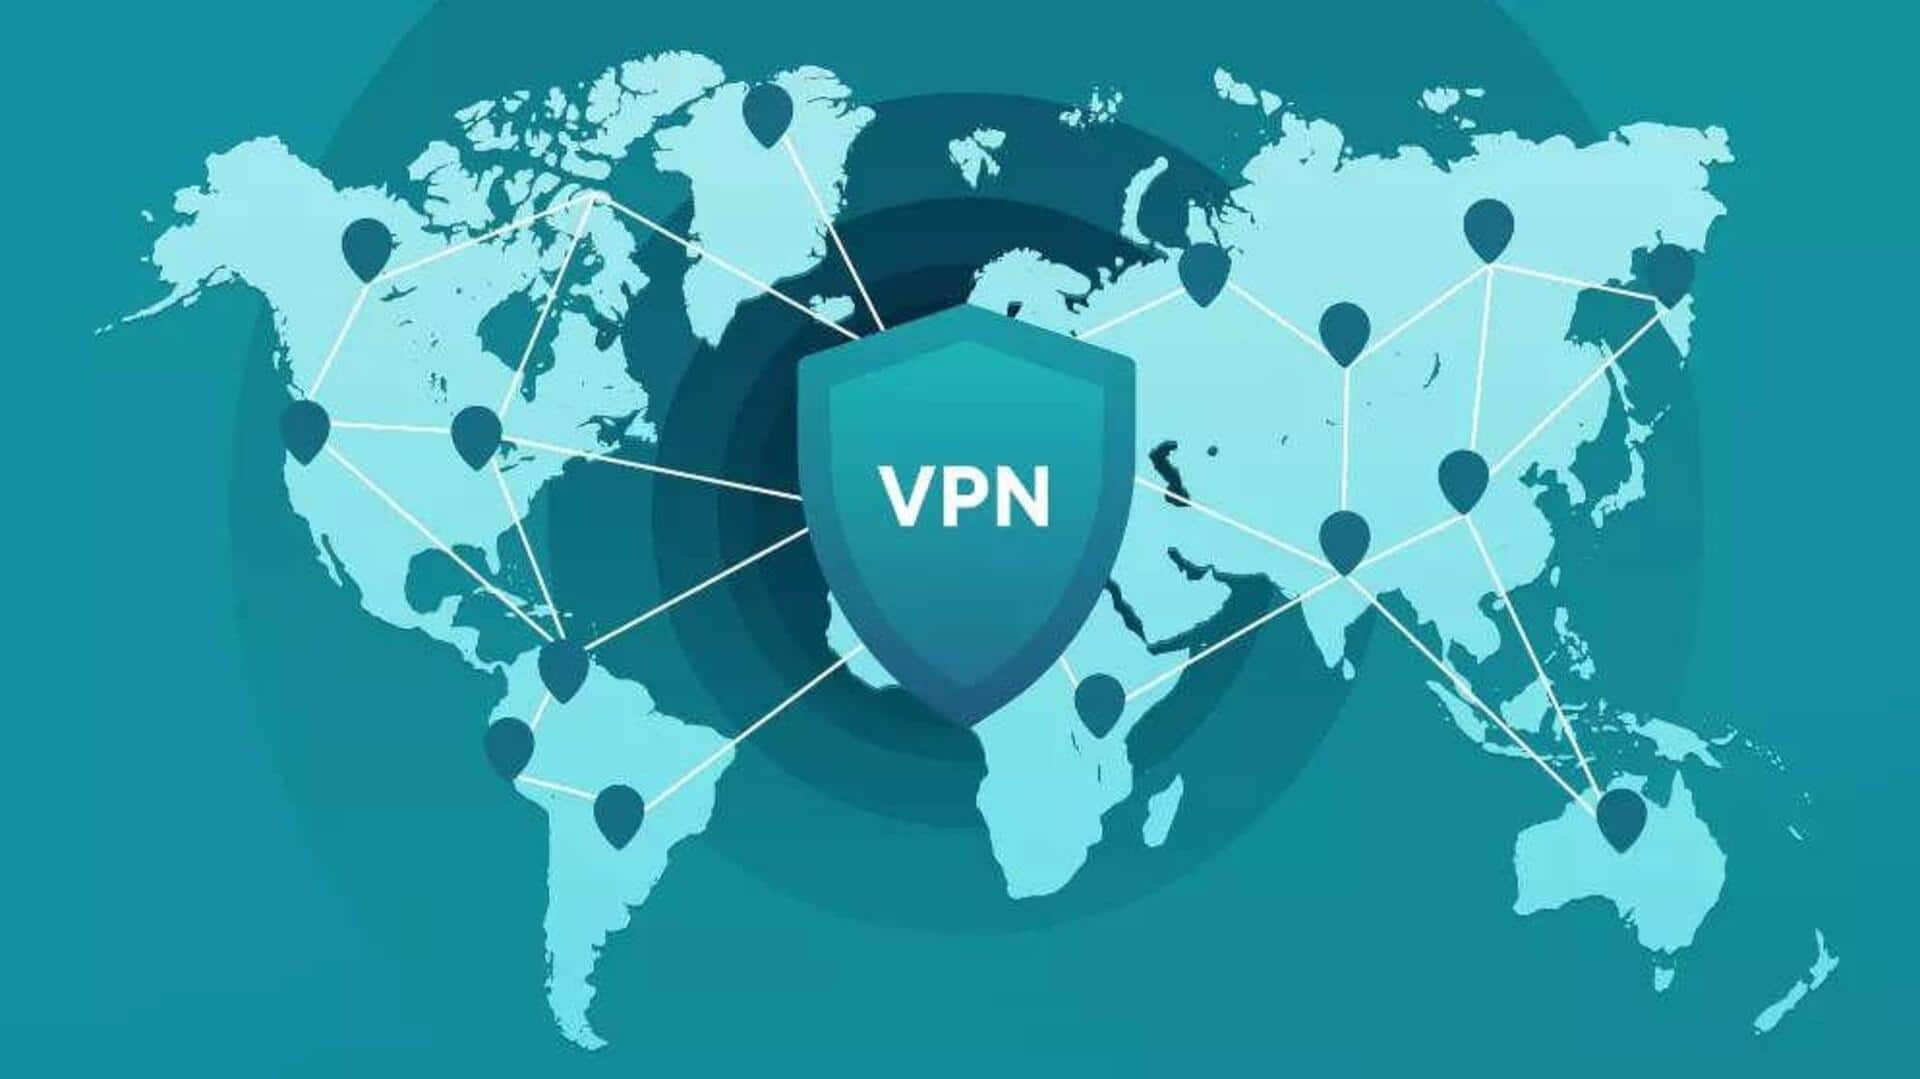 Russia to block VPN services deemed 'threat' to national security